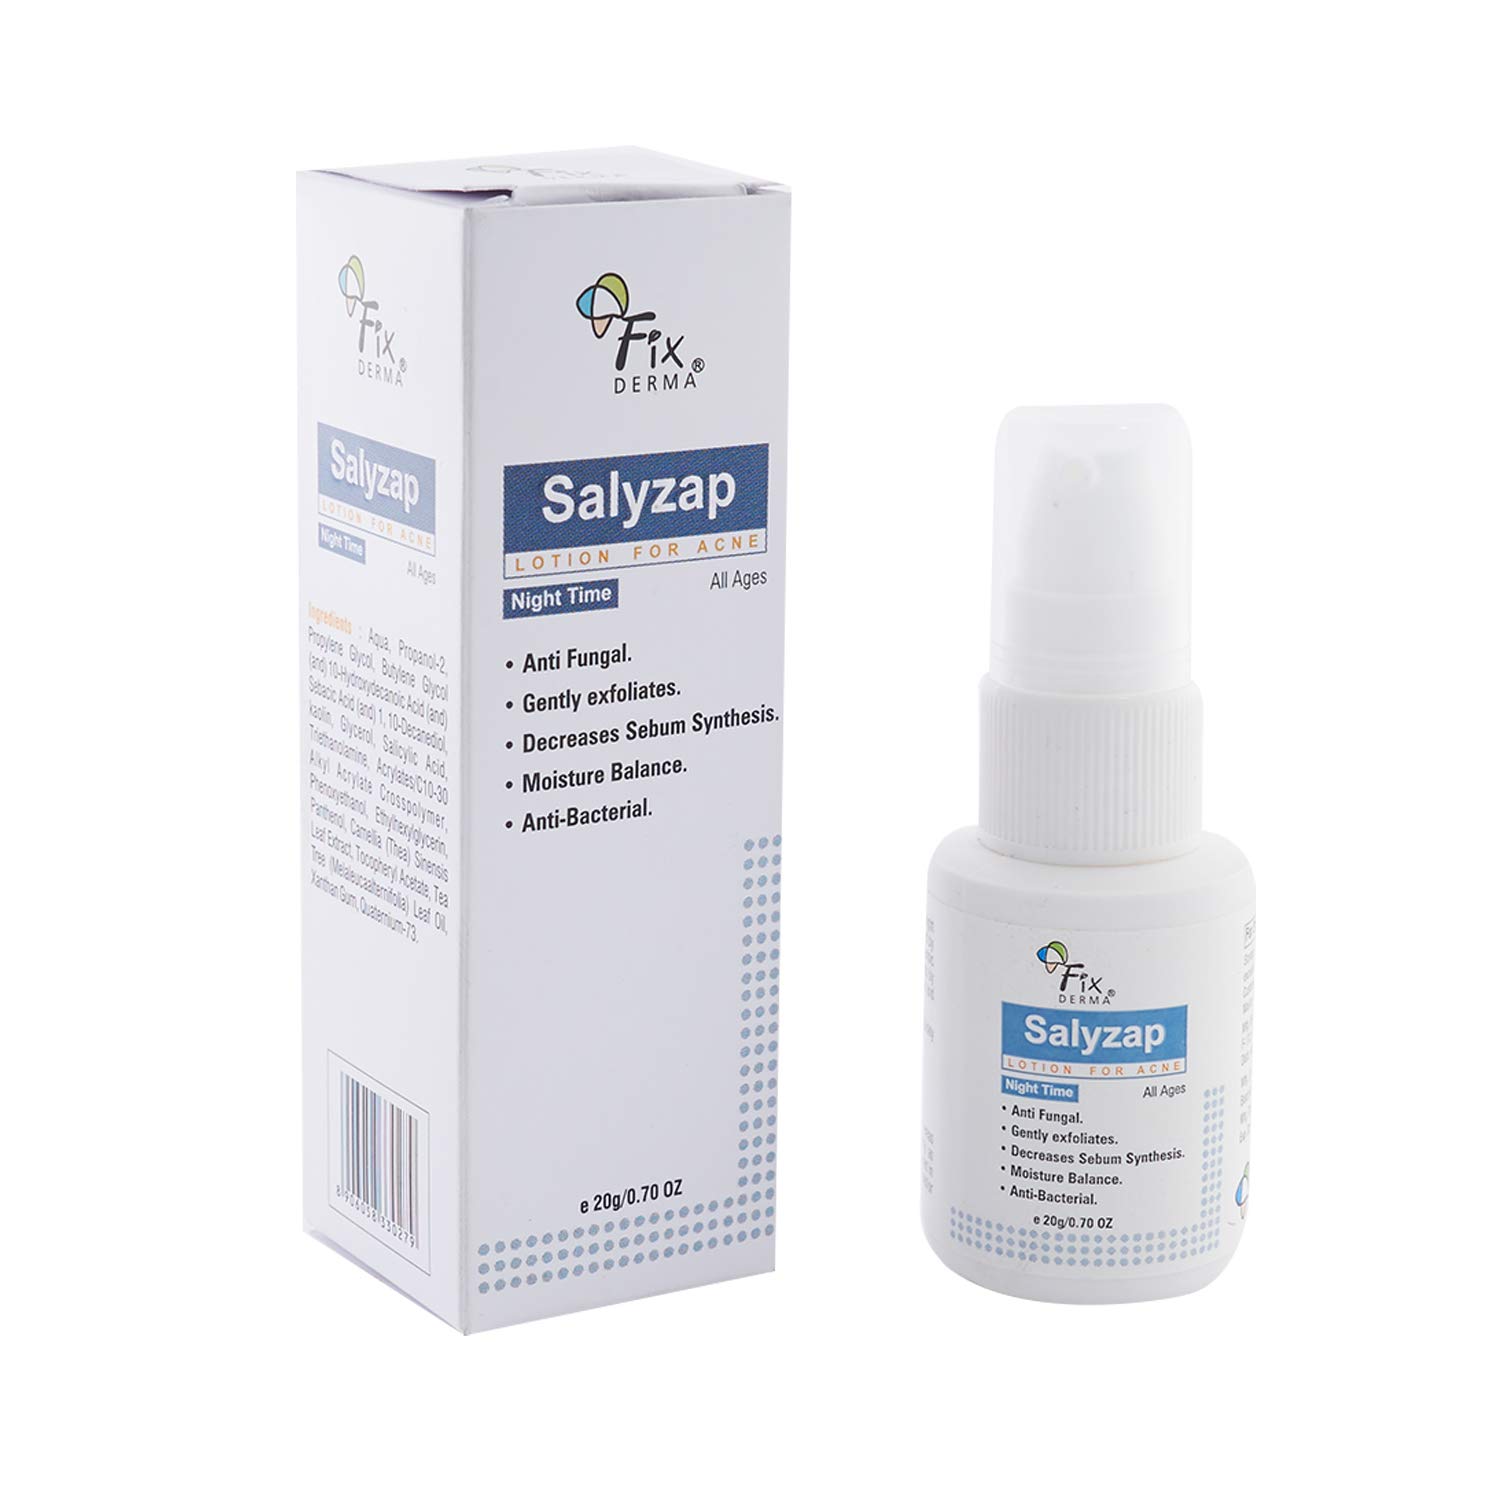 SALYZAP LOTION FOR ACNE NIGHT TIME